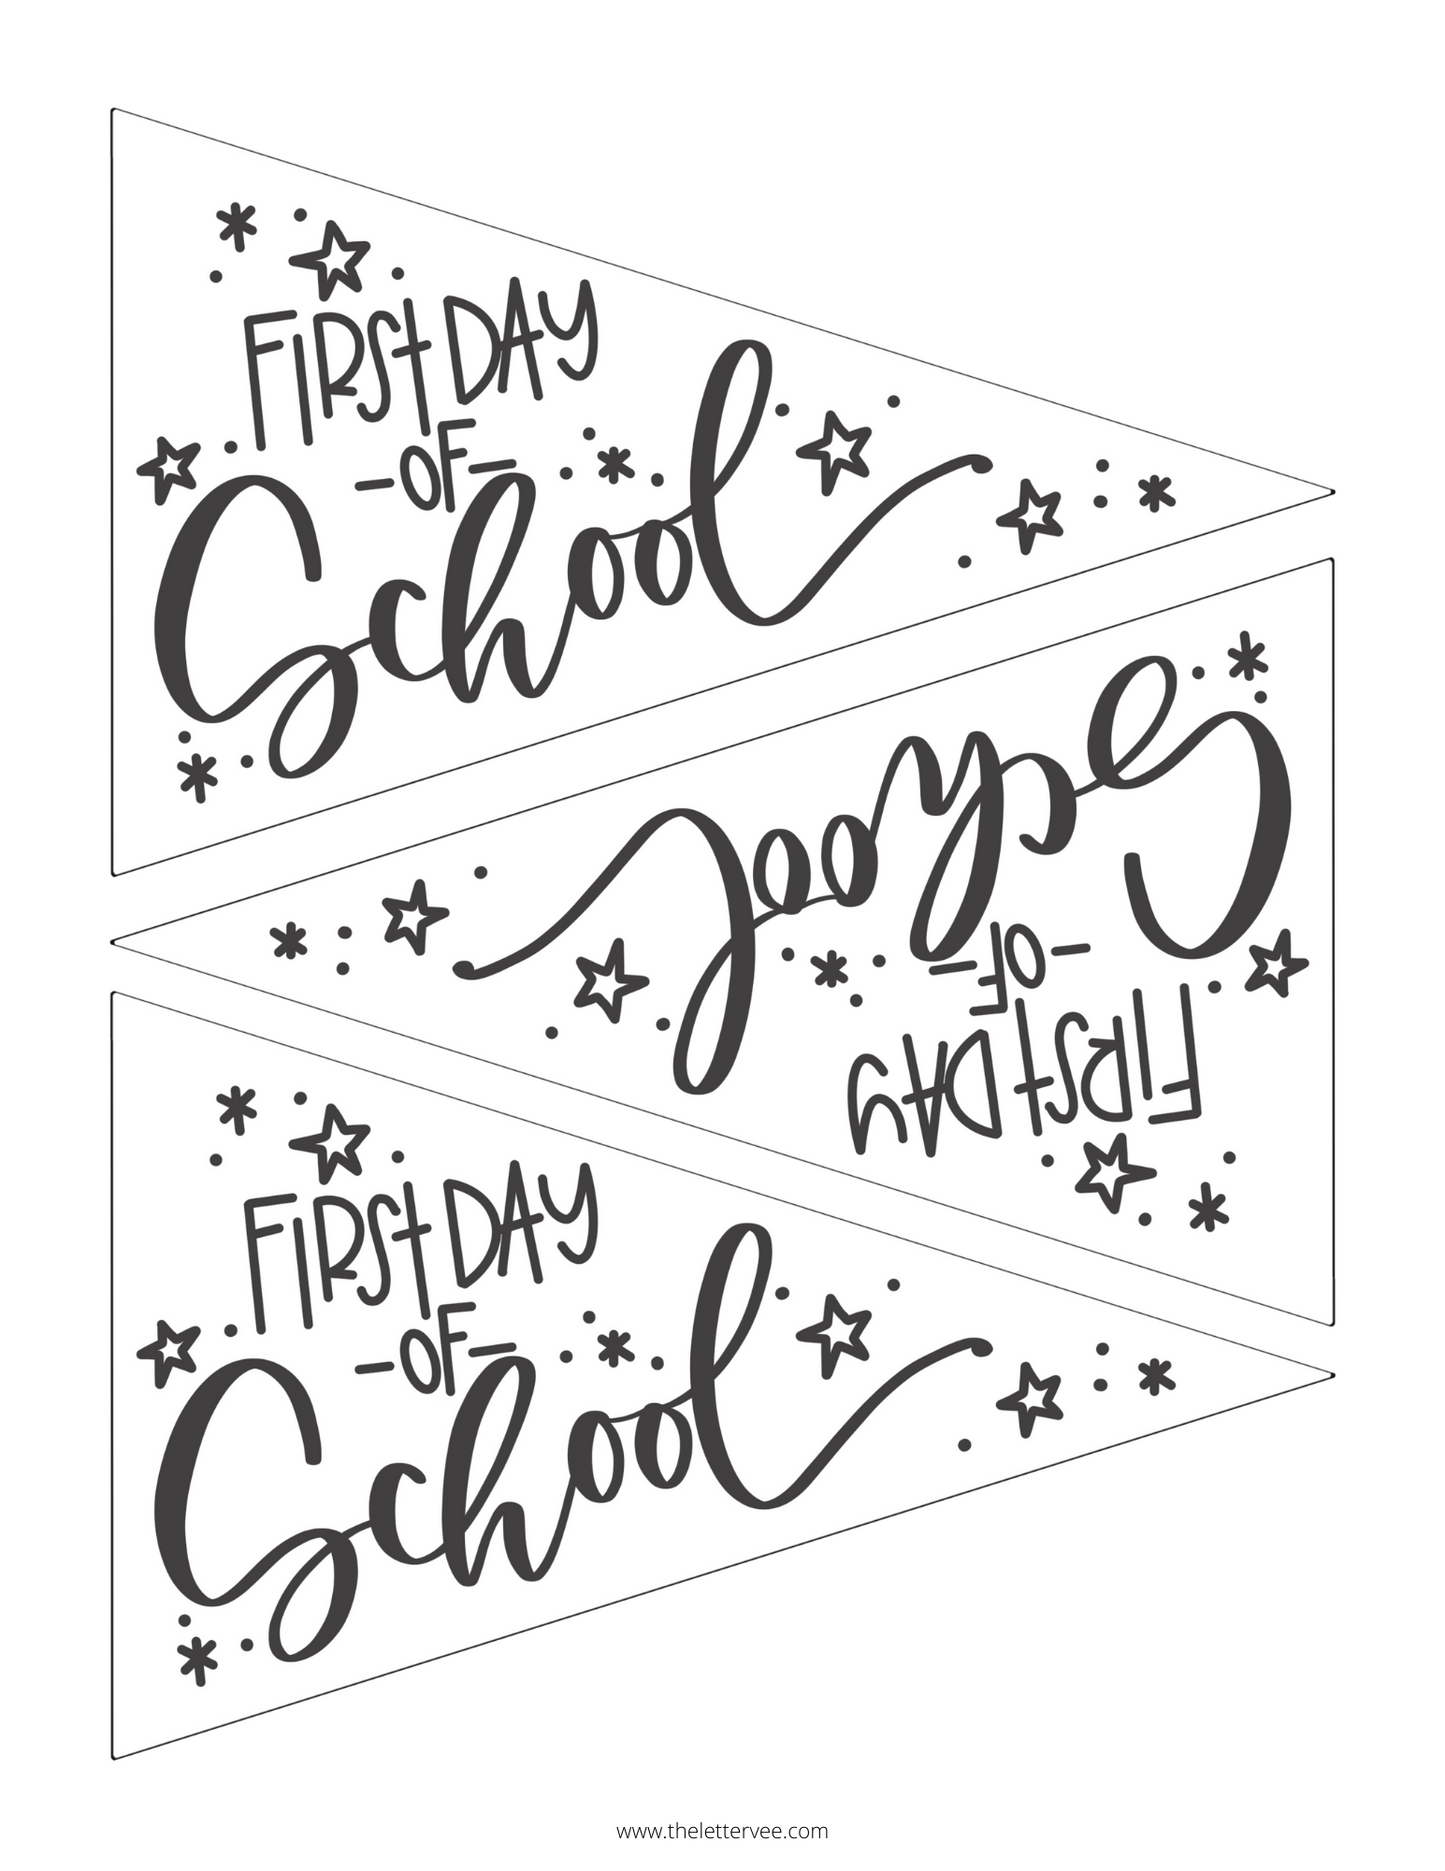 First Day of School | Printable pennants